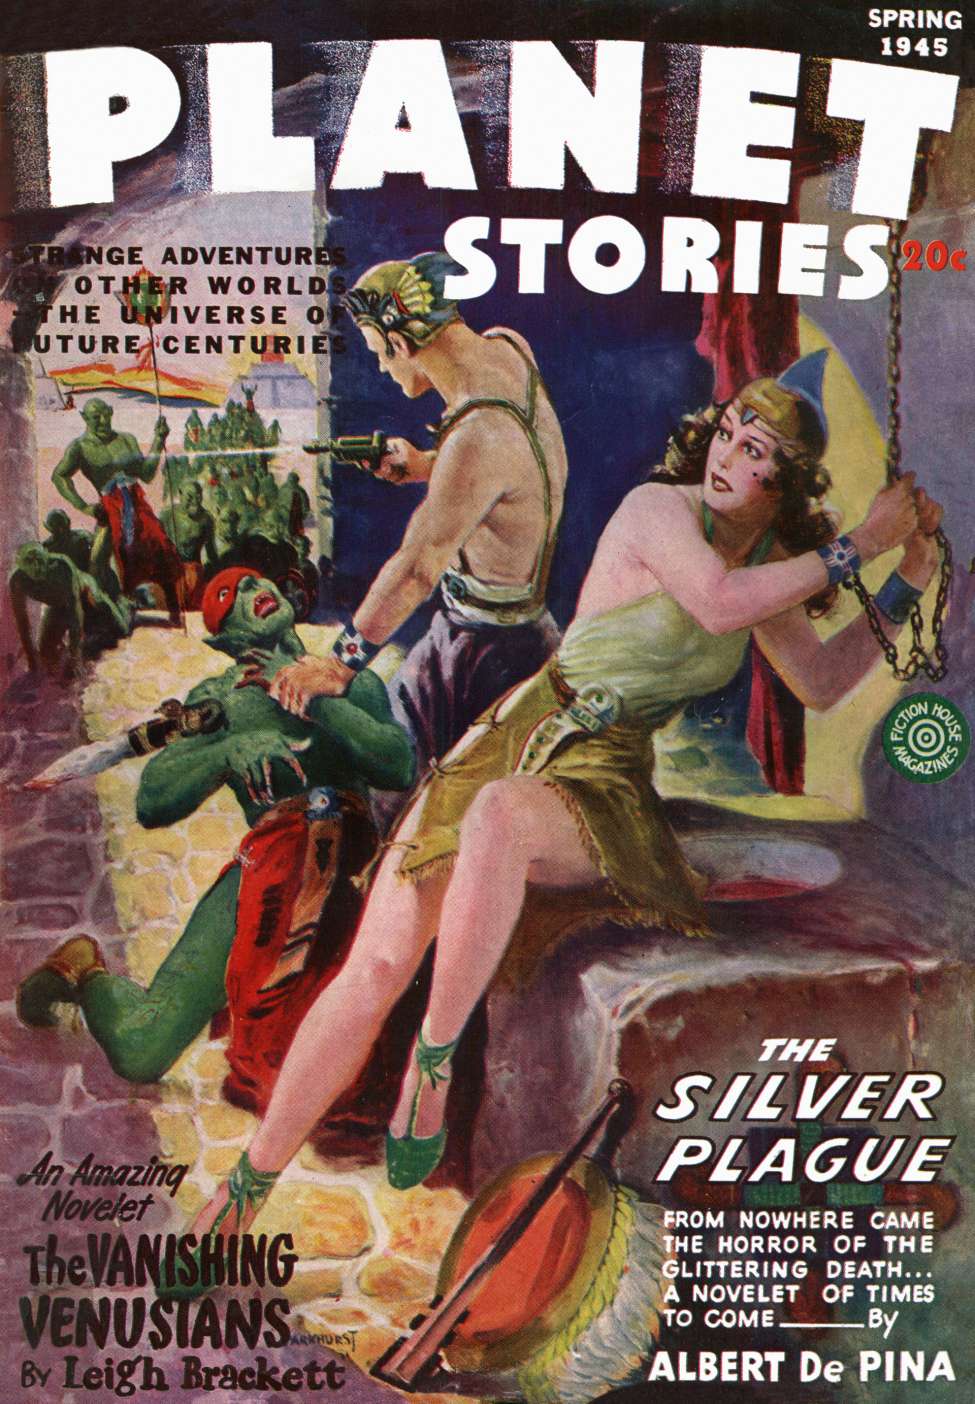 Book Cover For Planet Stories v2 10 - The Silver Plague - Albert dePina